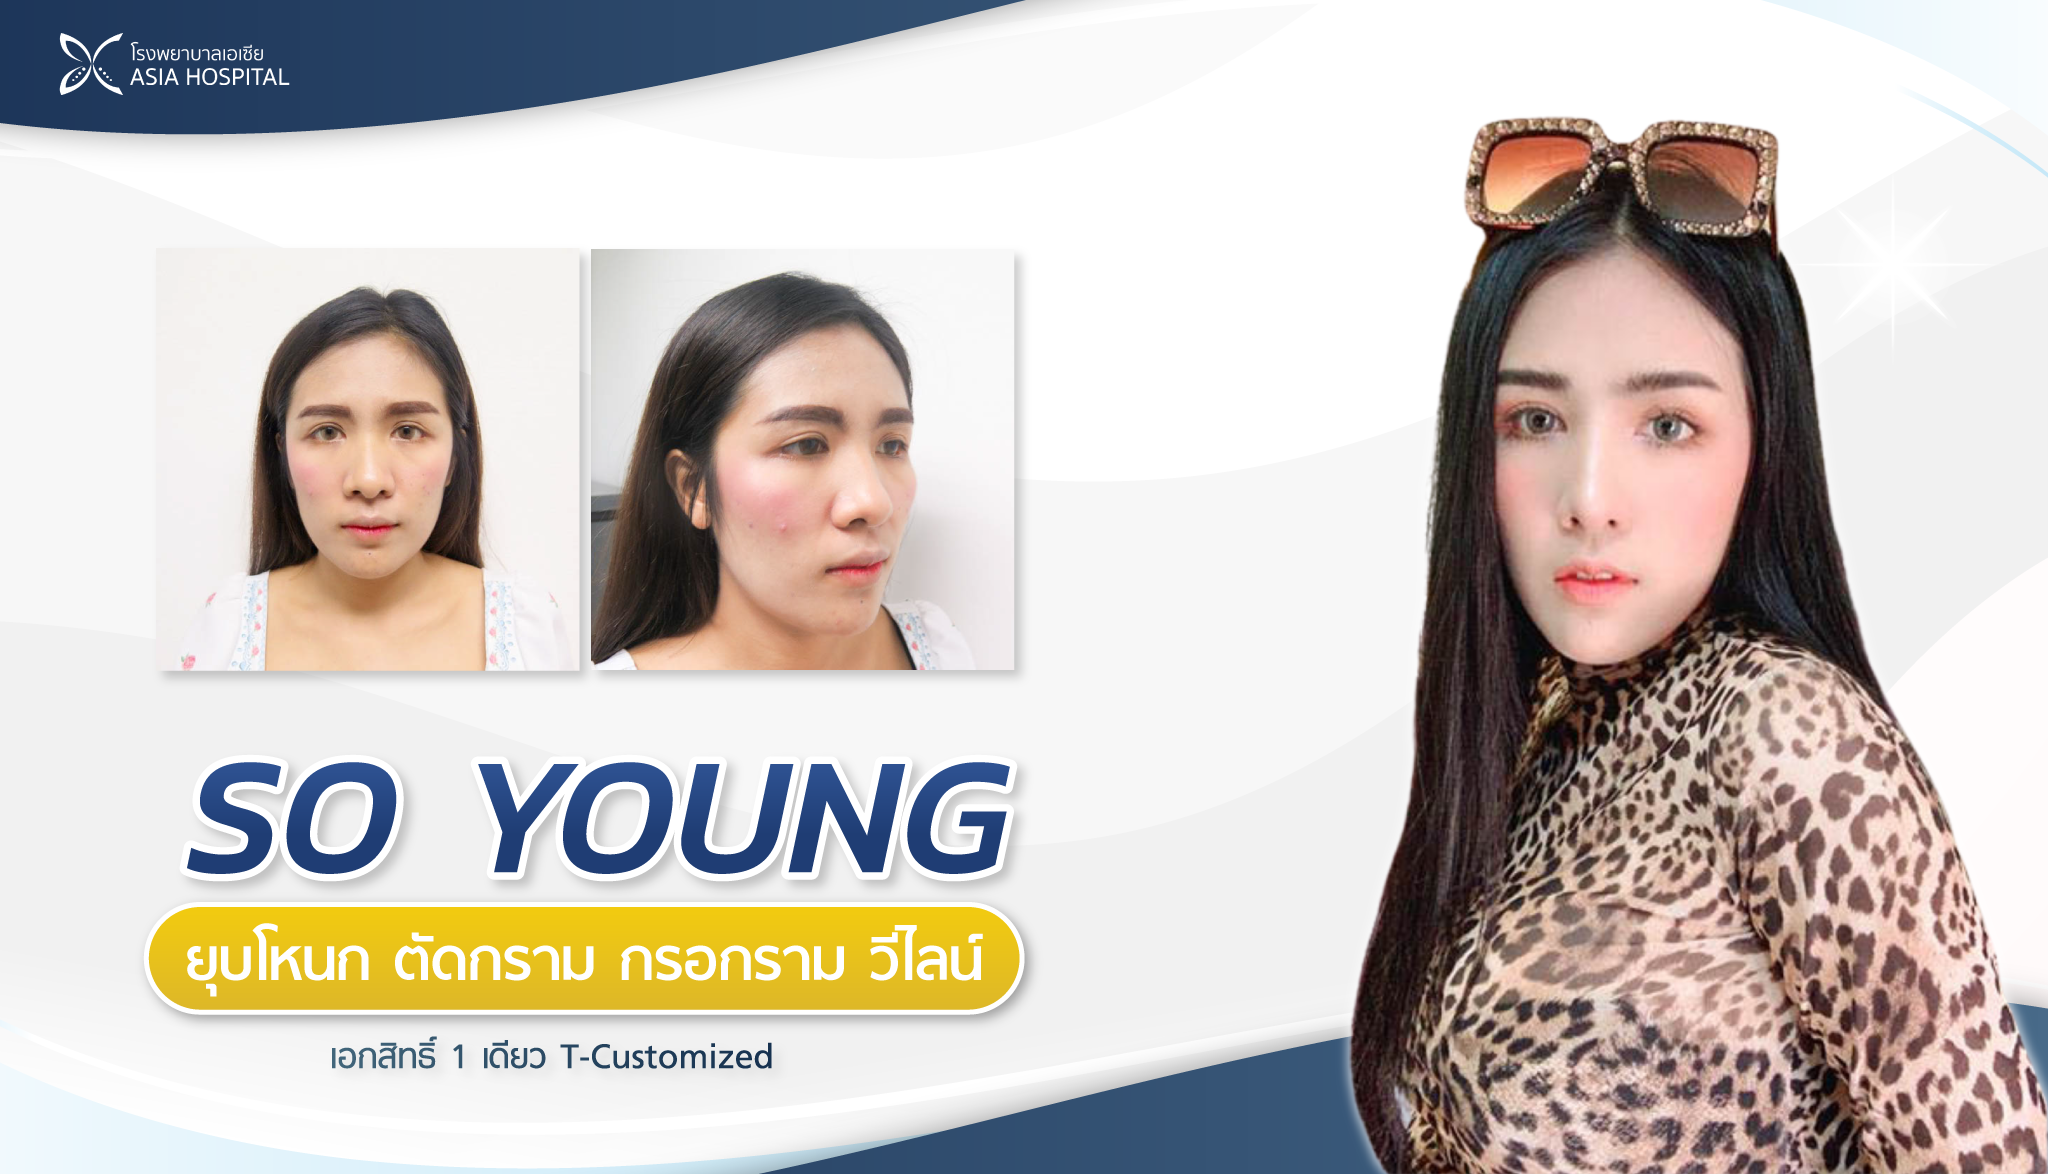 So young ที่เอเซีย รูปที่ 1